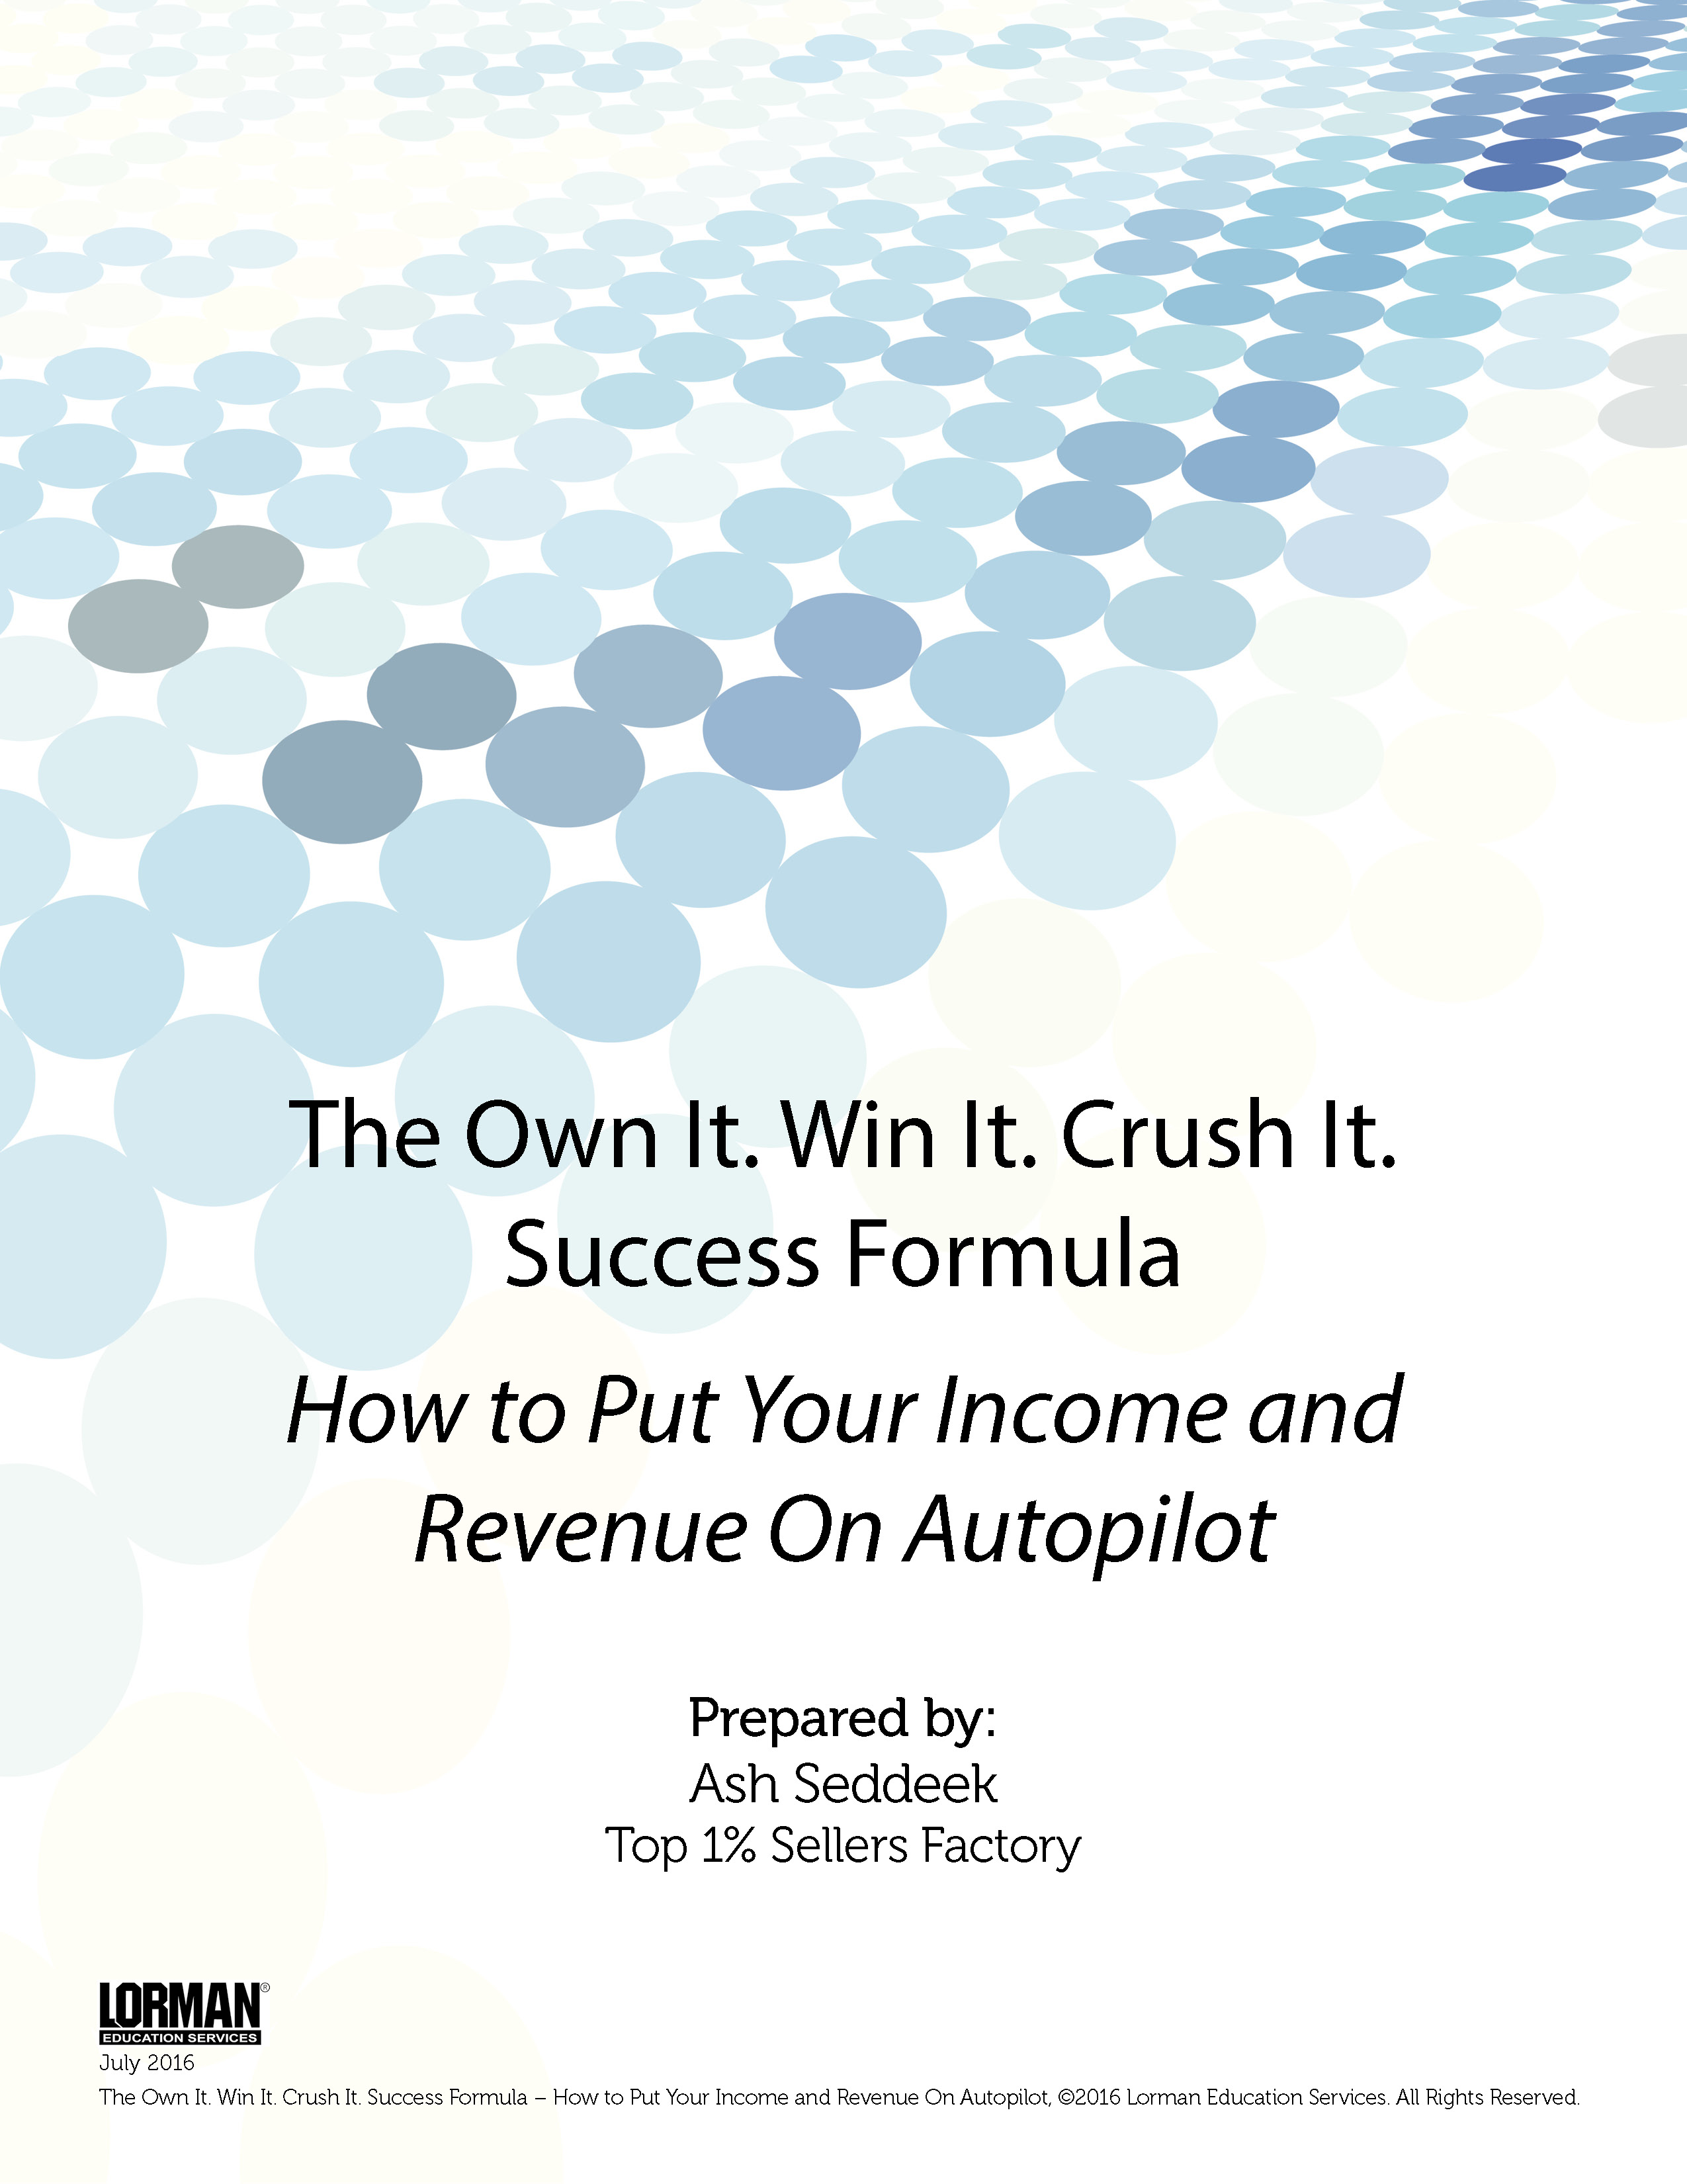 The Own It. Win It. Crush It. Success Formula - How to Put Your Income and Revenue On Autopilot